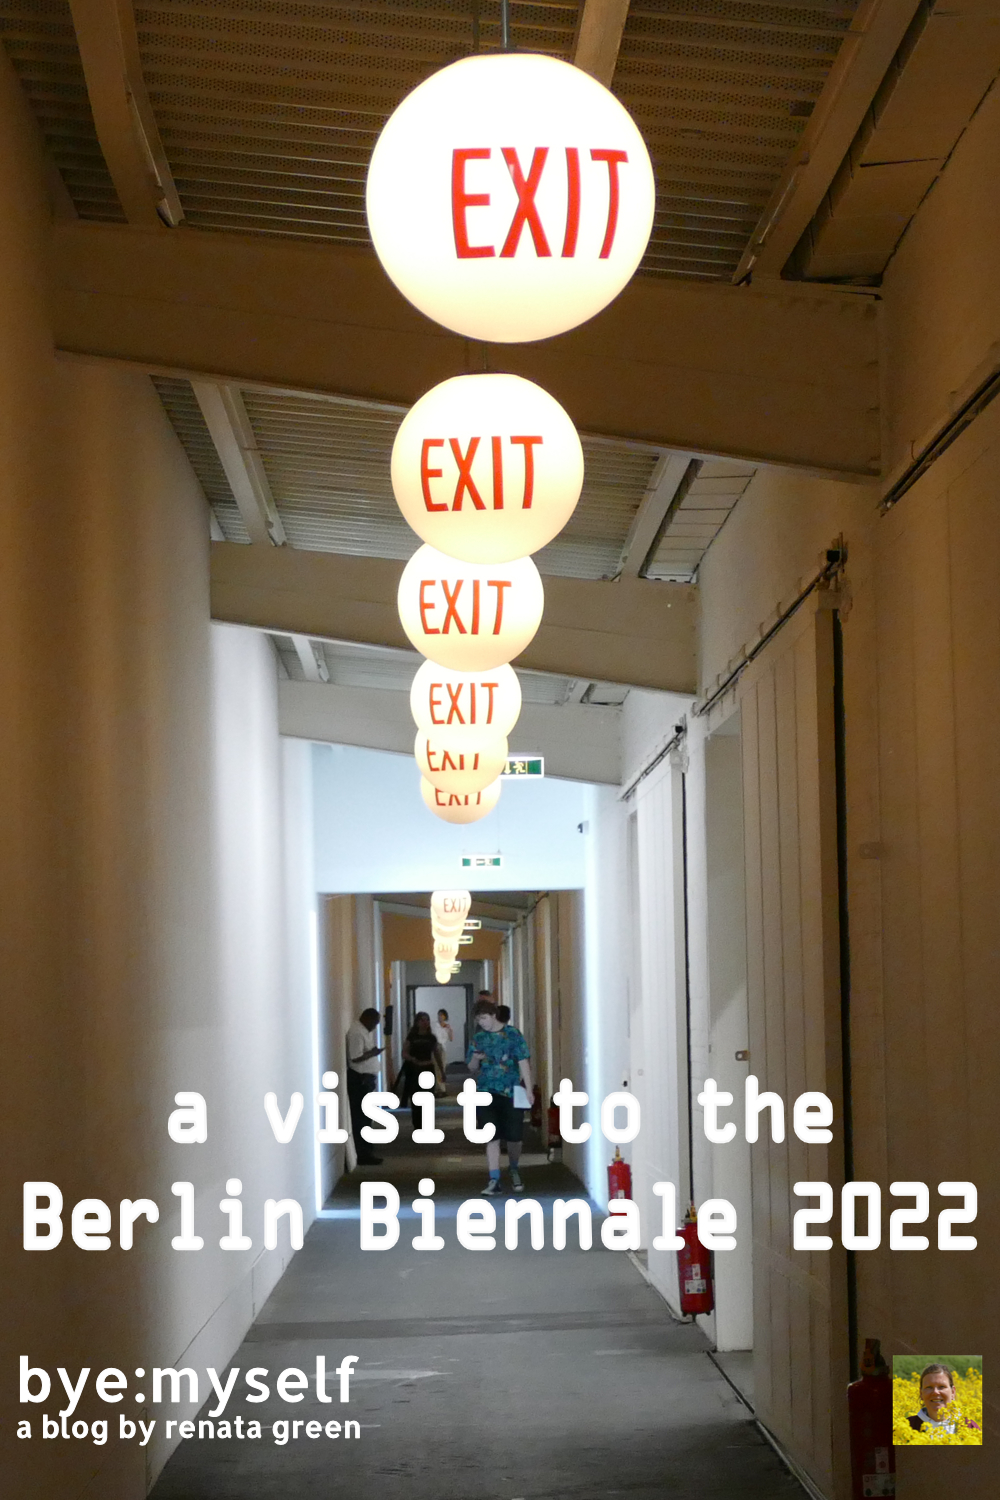 Pinnable Picture for the Post on A Visit to the Berlin Biennale 2022